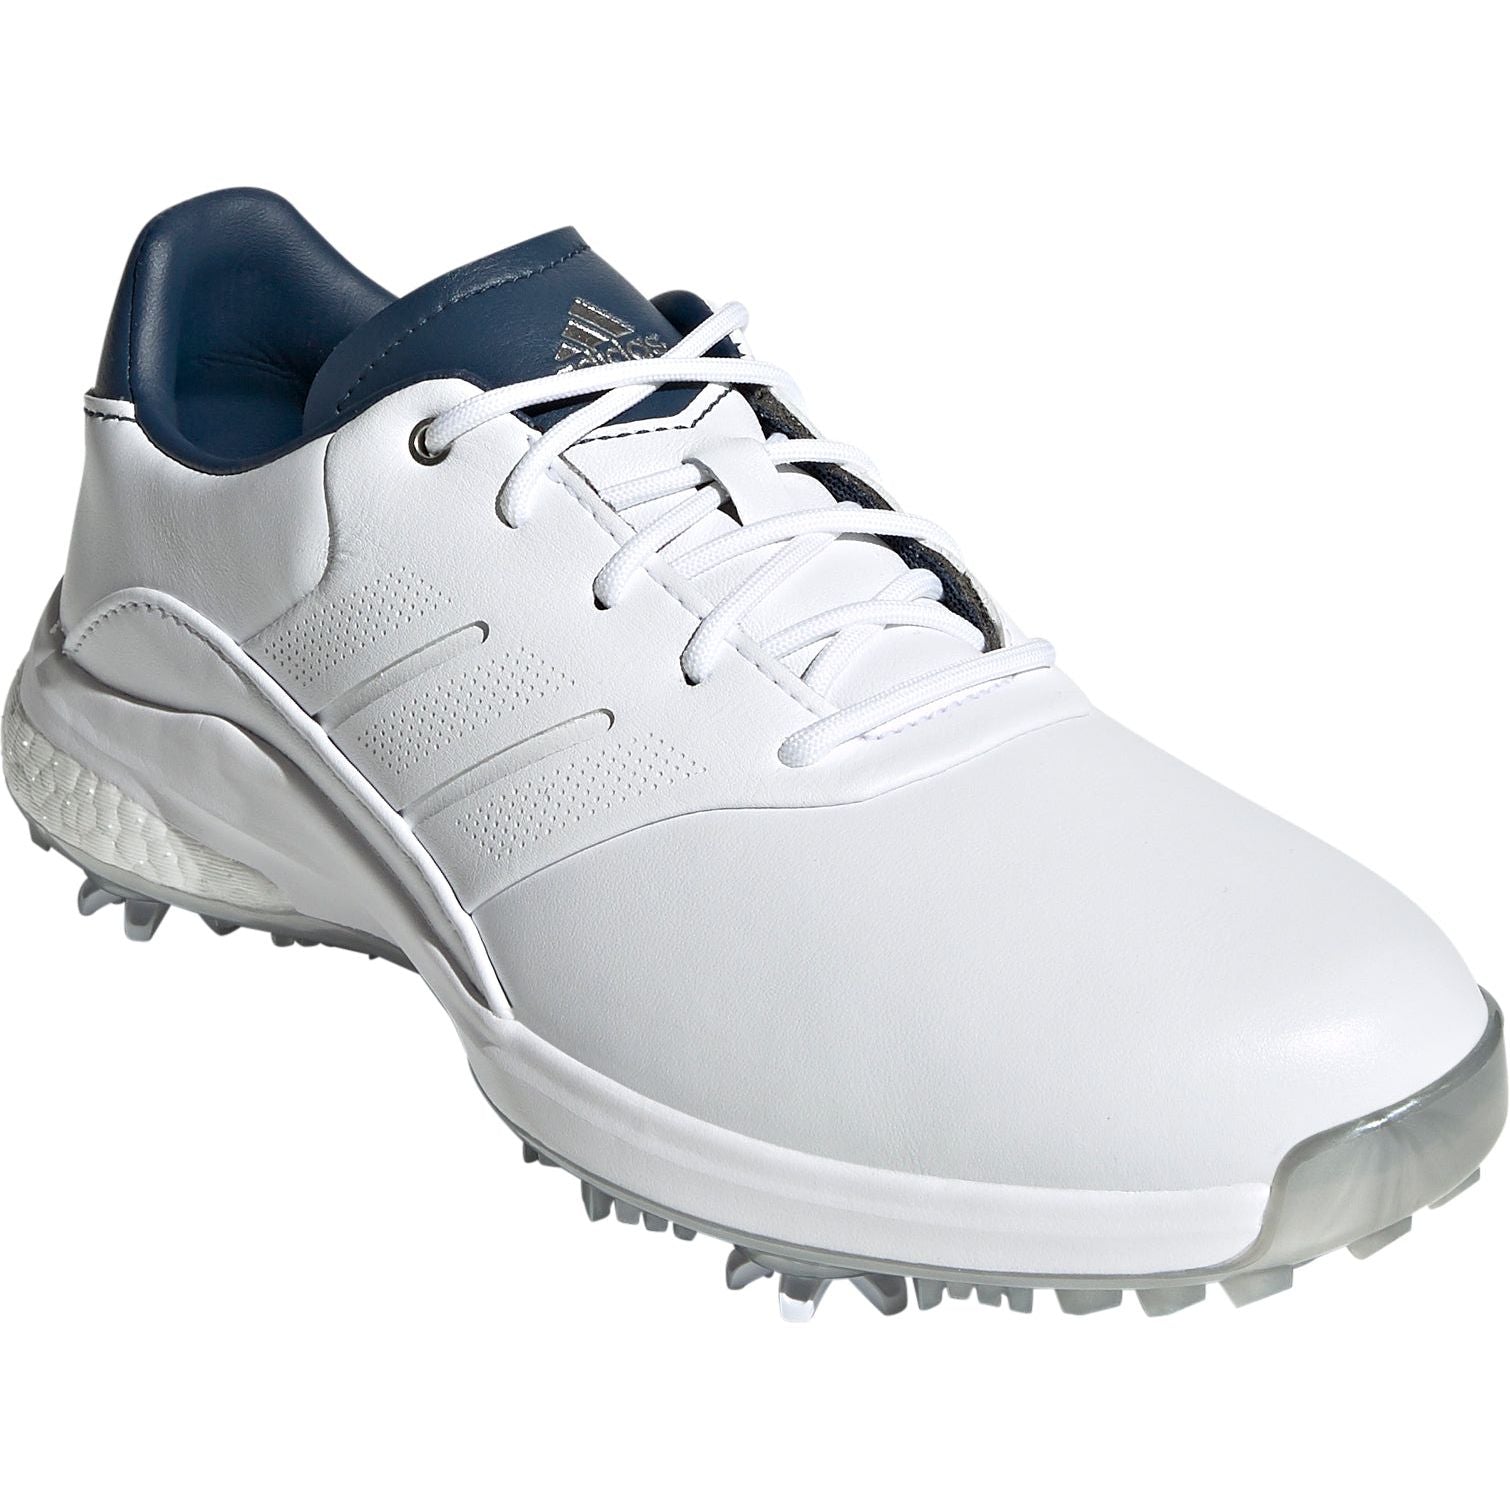 Adidas Performance Classic Golf Shoes Fx4330 Front - Front View